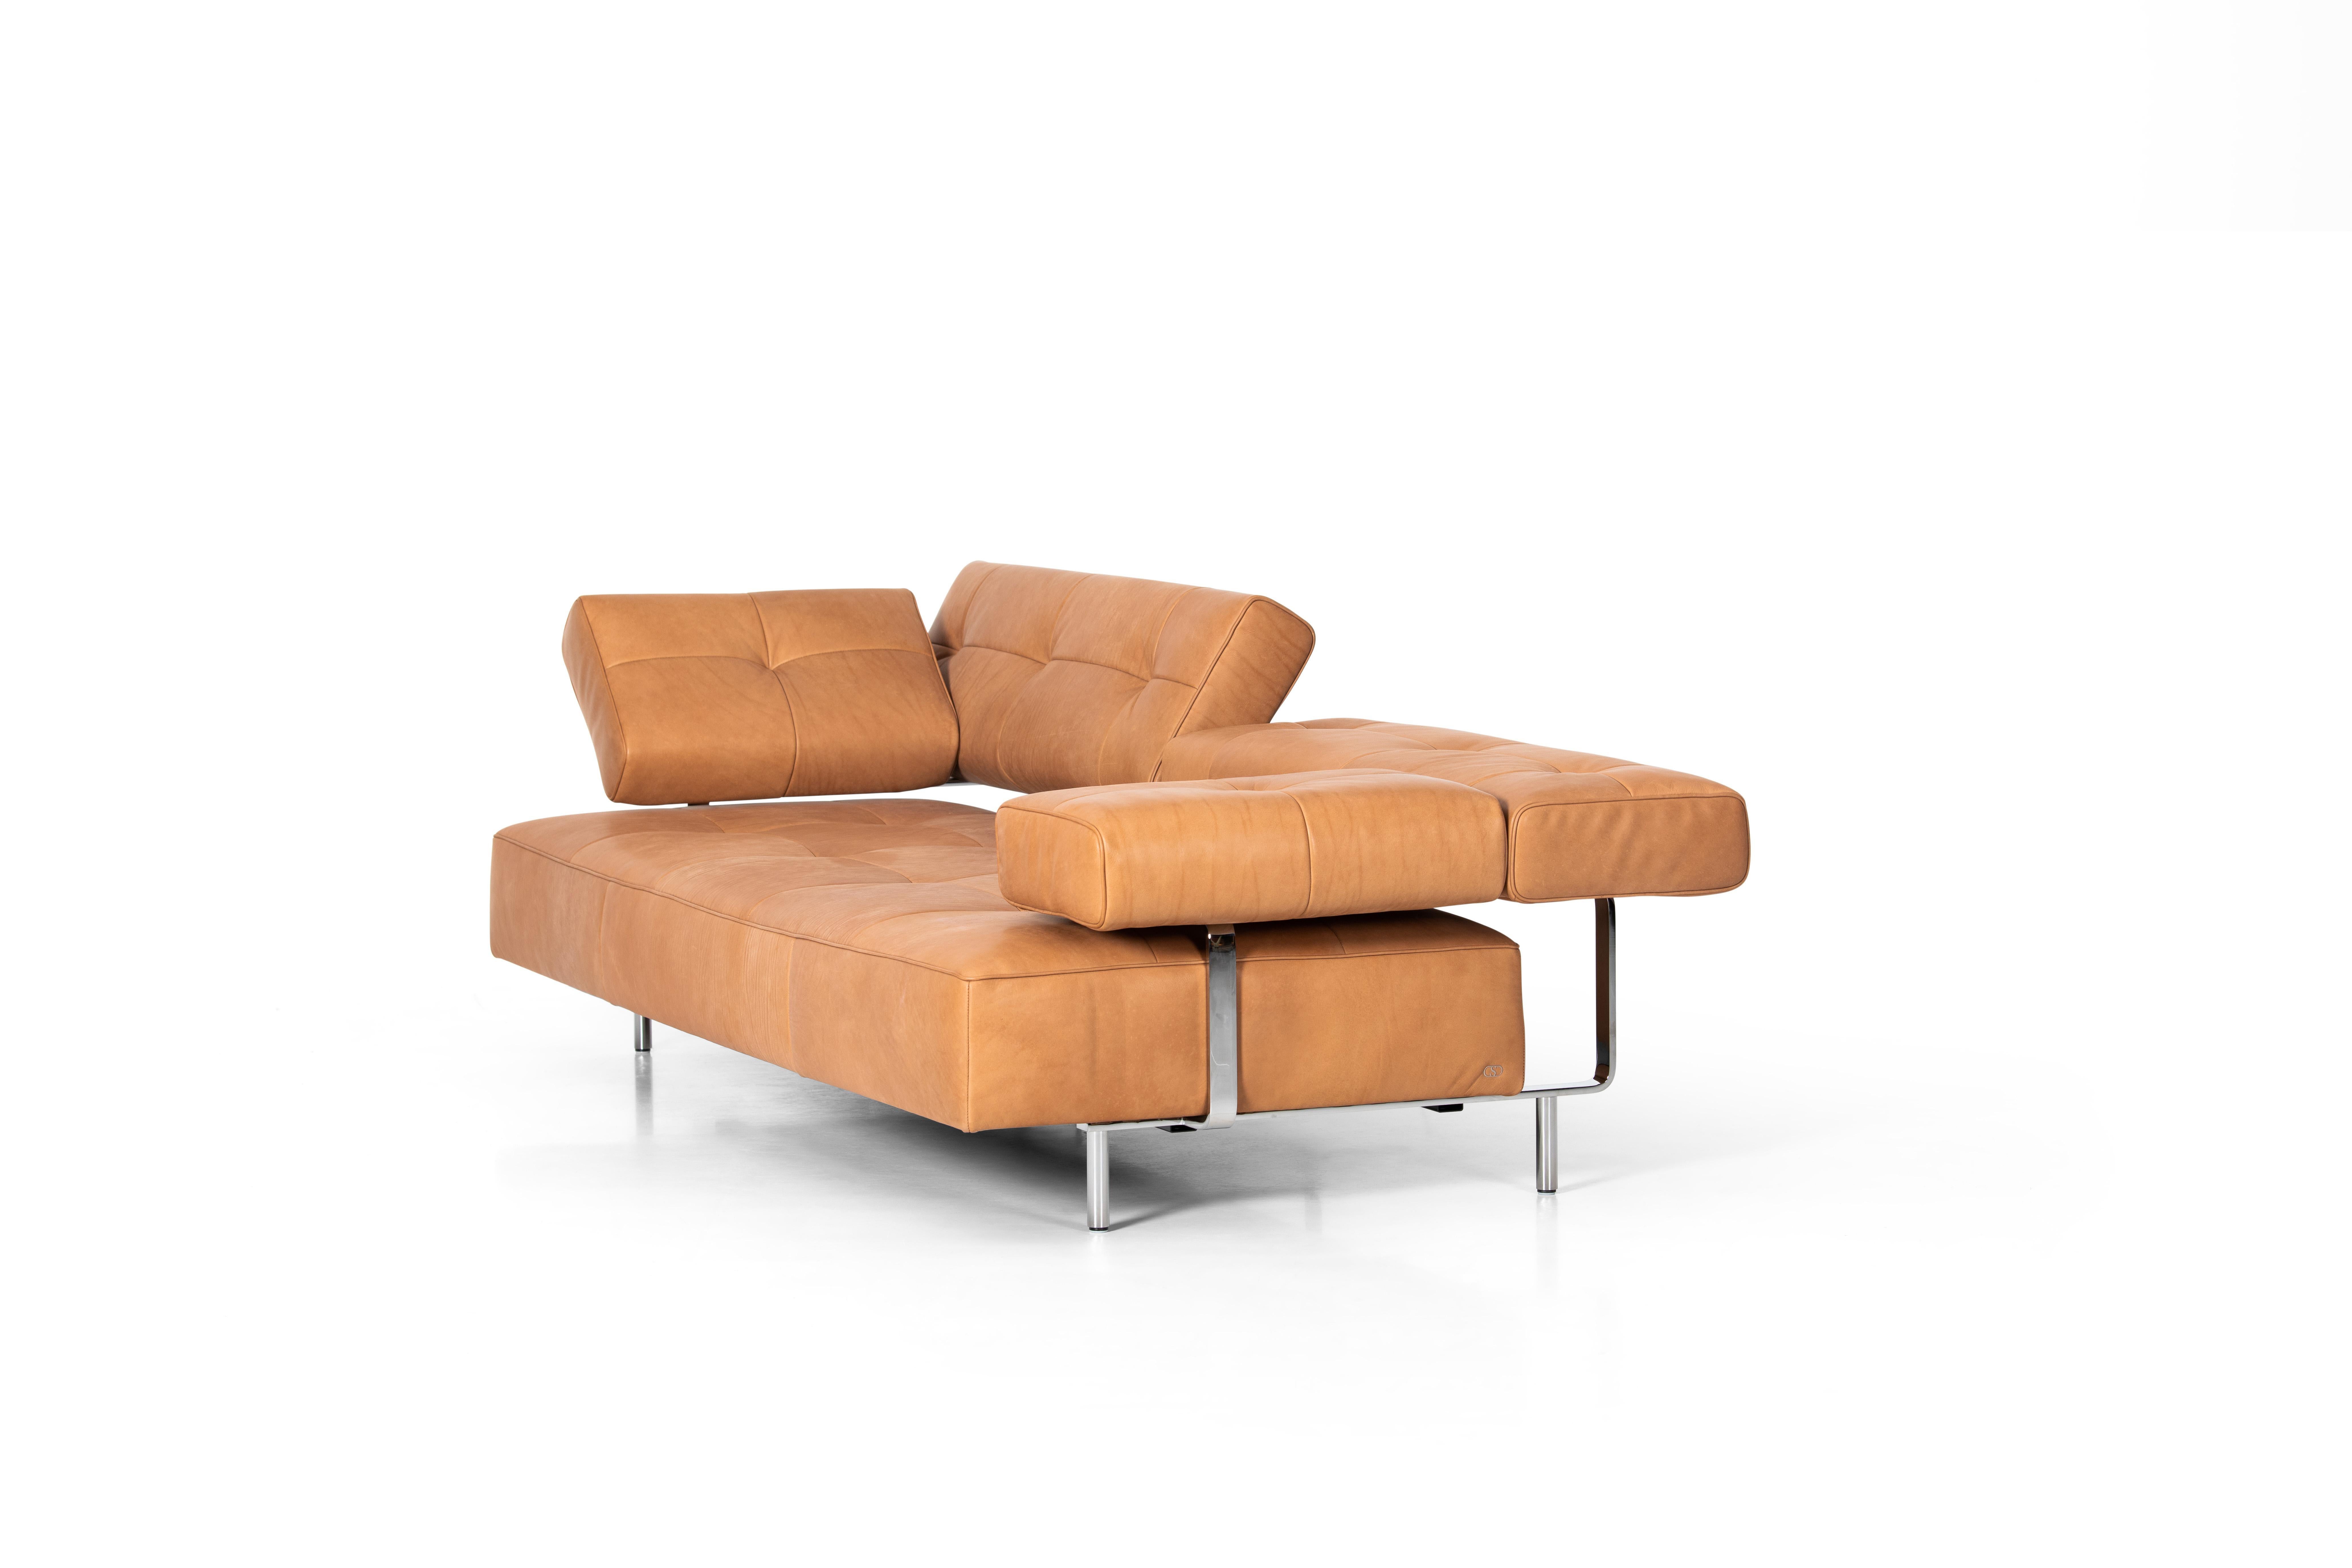 Swiss De Sede DS-880/23 Comfortable Sofa in Cuoio Leather Seat and Back Upholstery For Sale